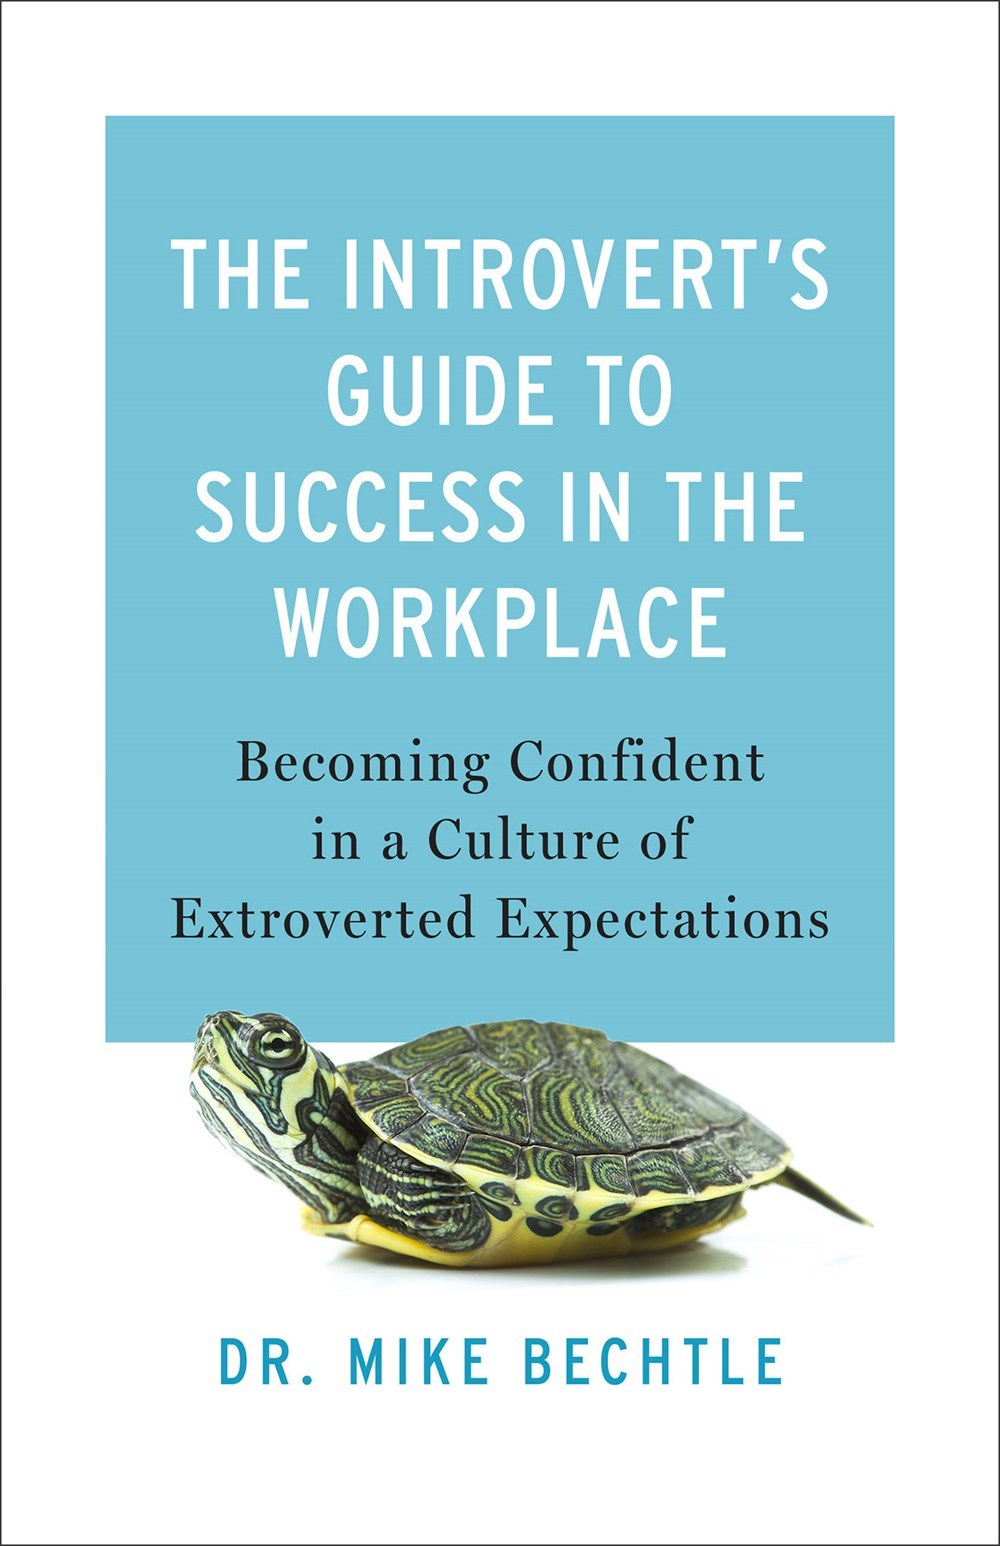 The Introvert's Guide To Success In The Workplace